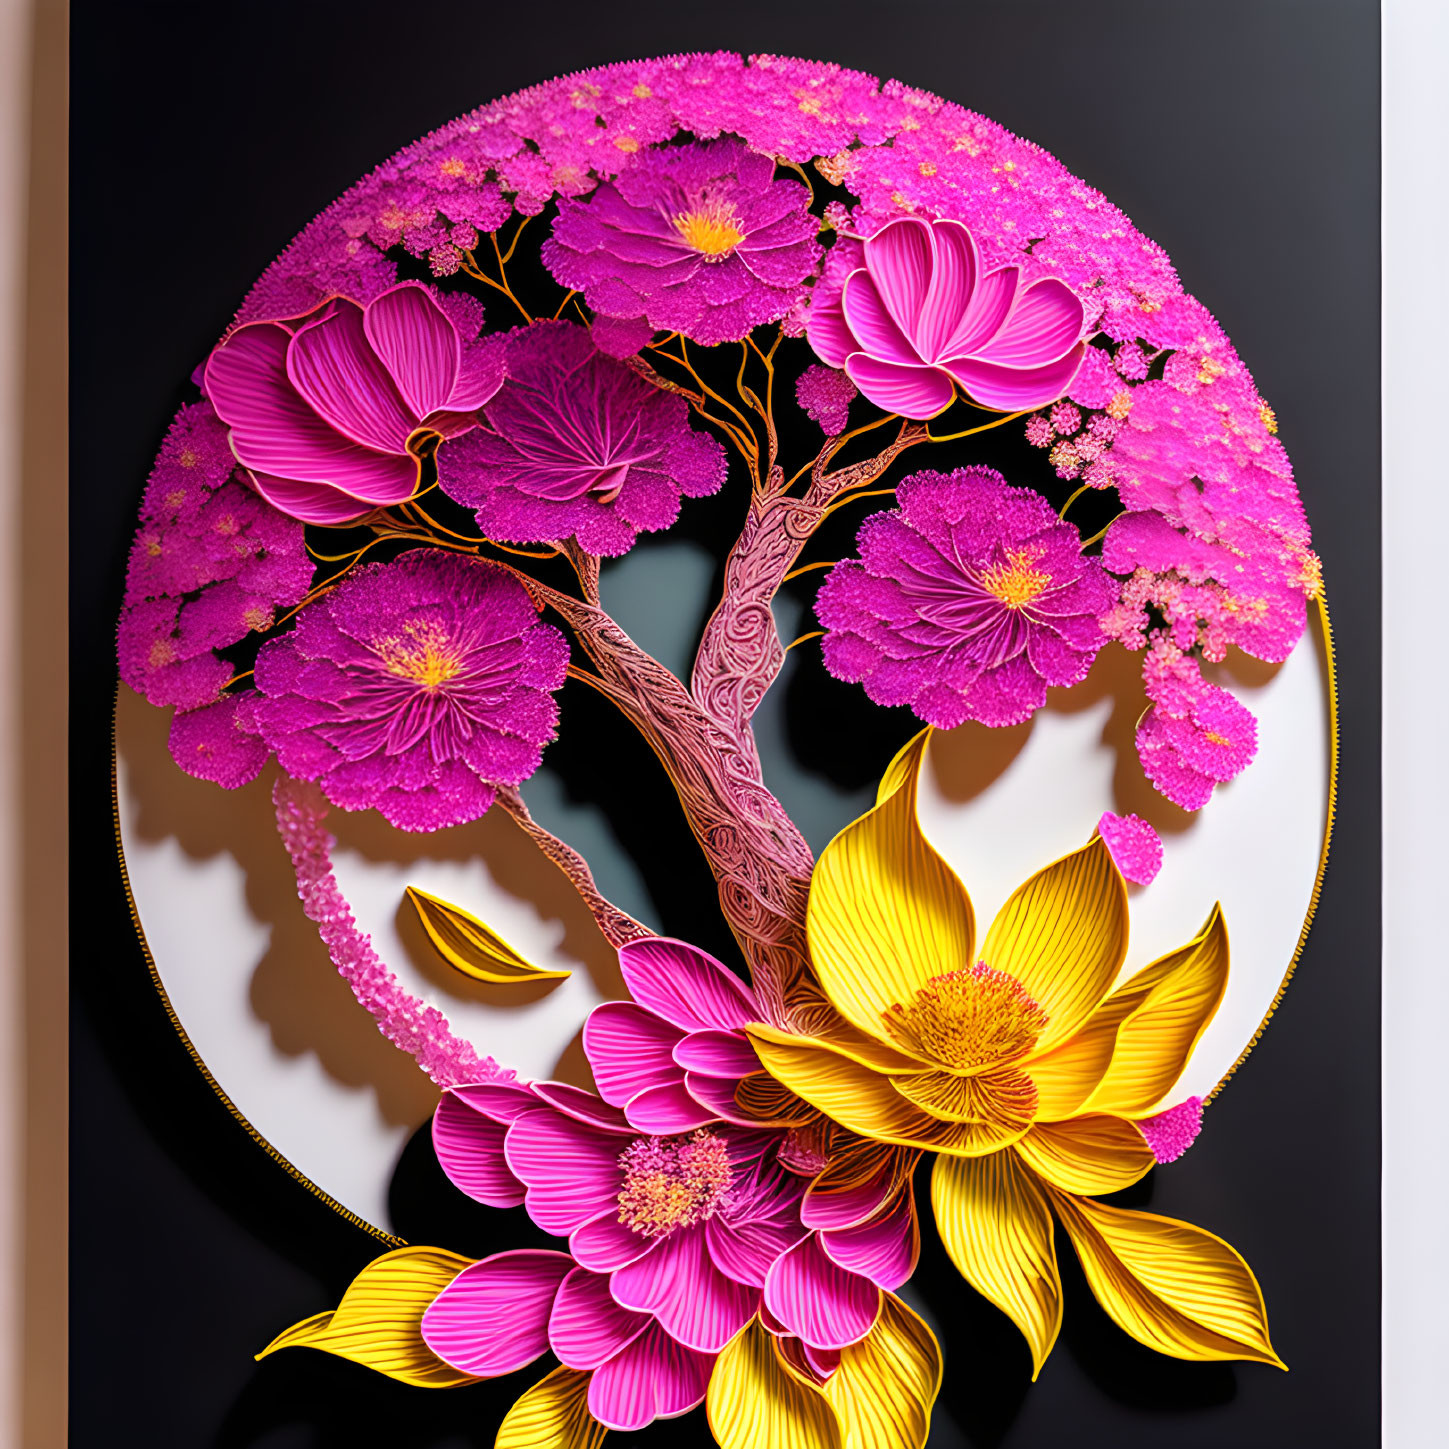 Colorful circular tree artwork with pink and yellow flowers on black background